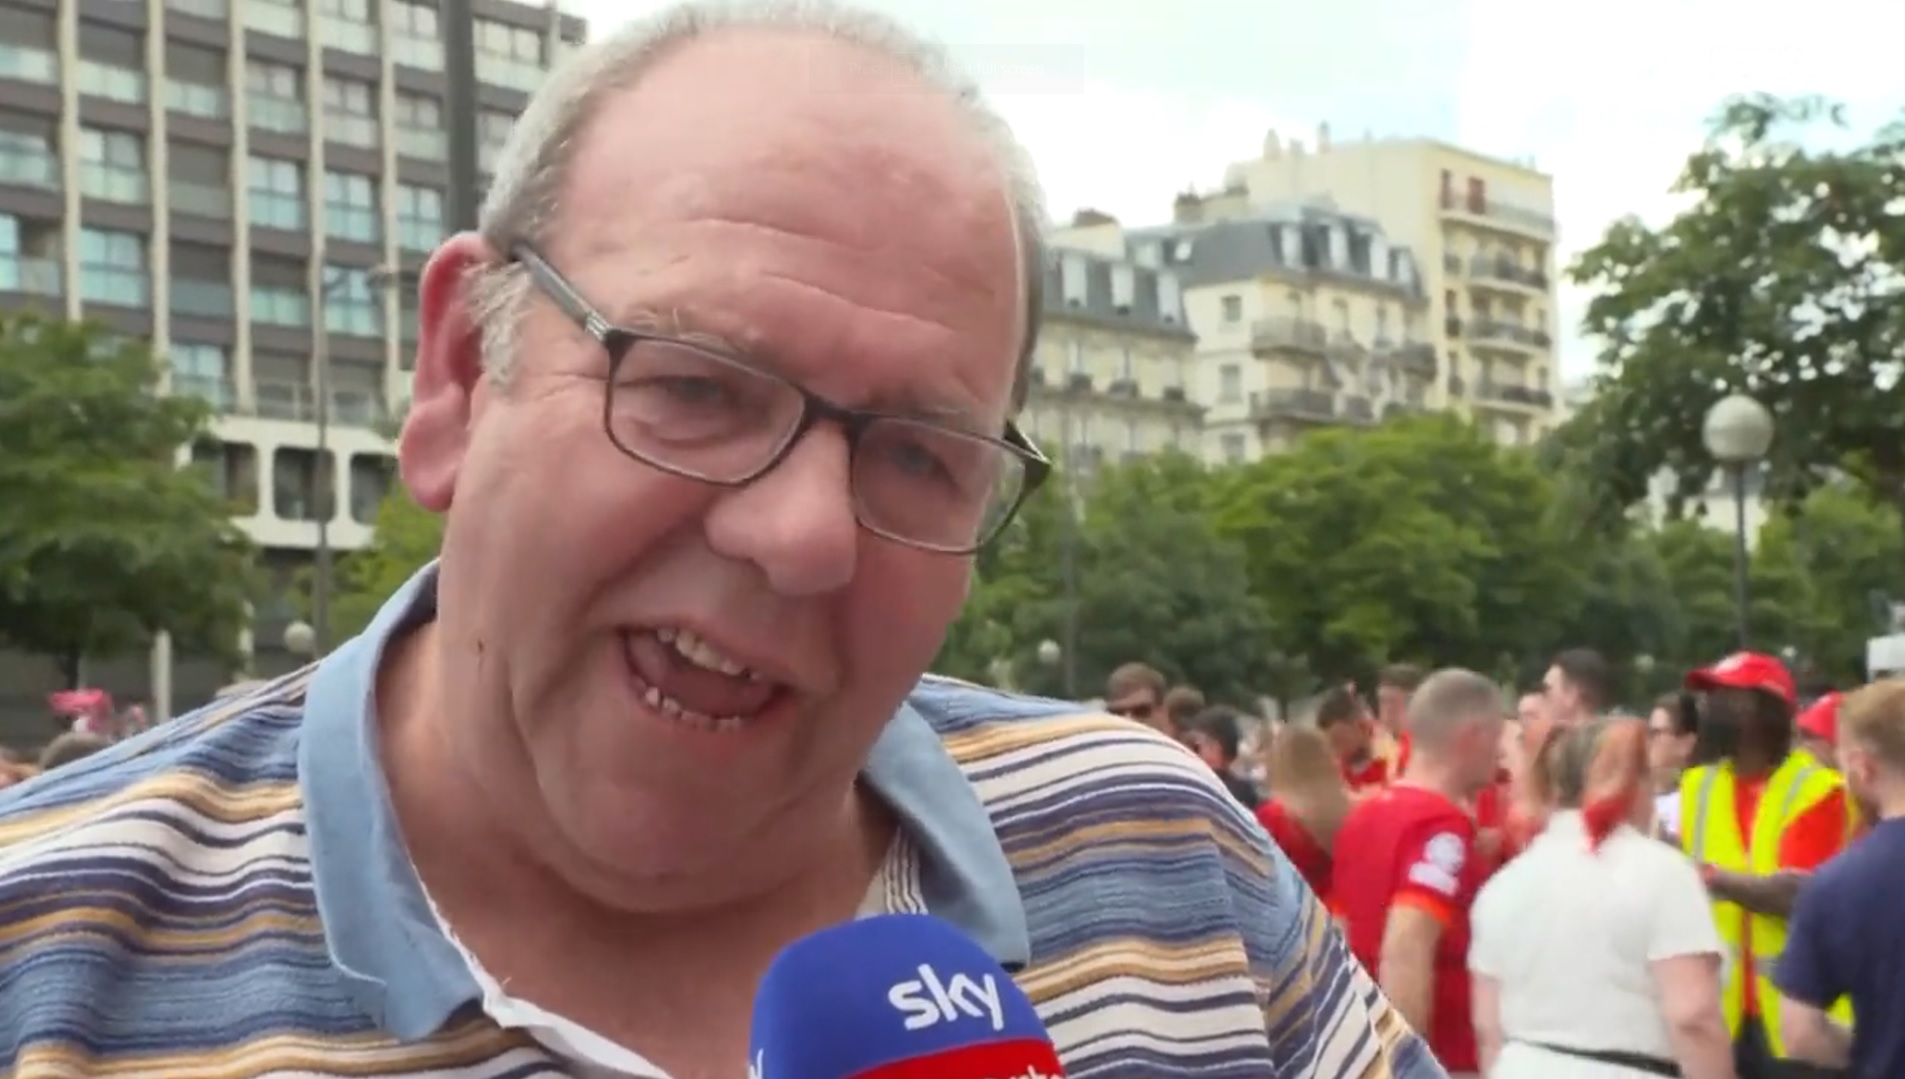 (Video) Man City fan who travelled to Paris can’t believe incredible Liverpool fan-generated atmosphere